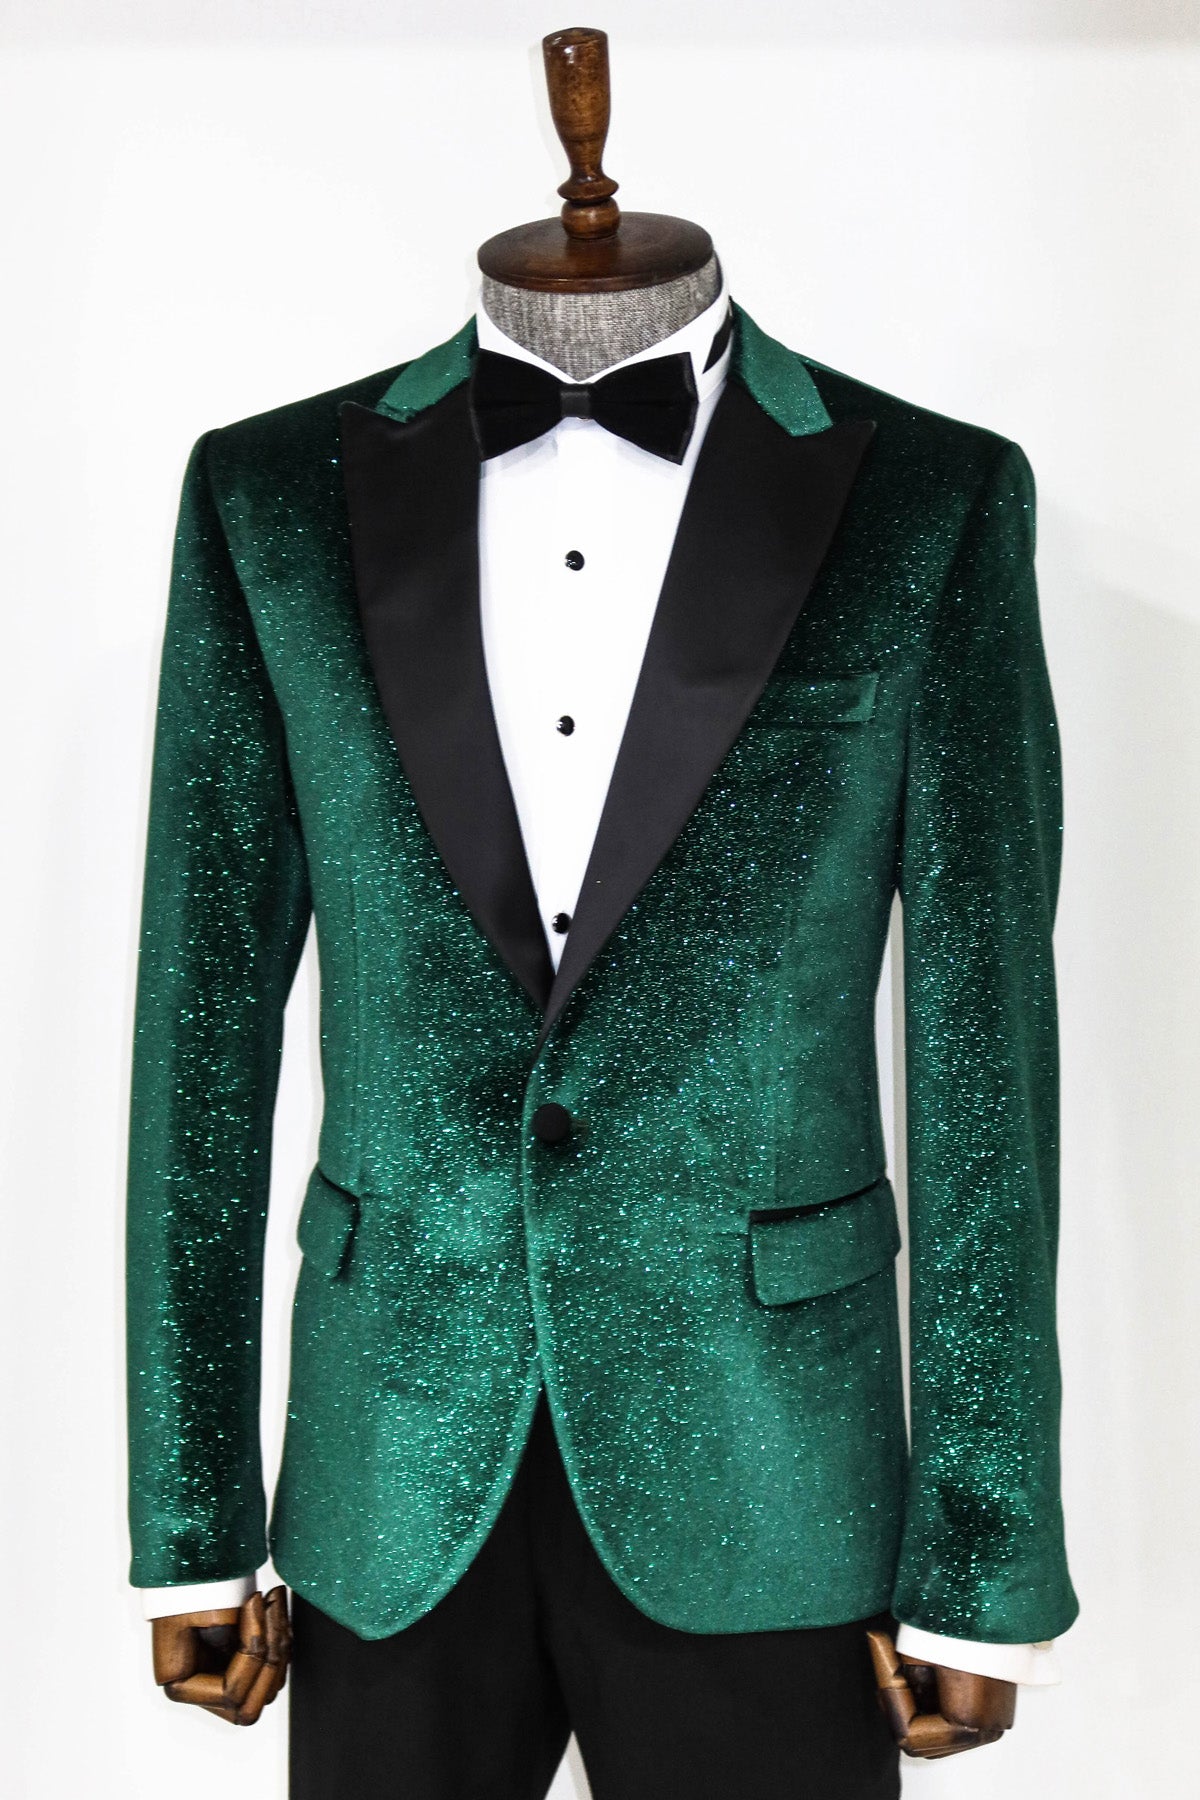 KCT Menswear - Men's Velvet Emerald Green Shiny Silver Sparkle Prom Blazer with Peak Black Satin Lapel - Luxurious and Stylish for Prom and Formal events